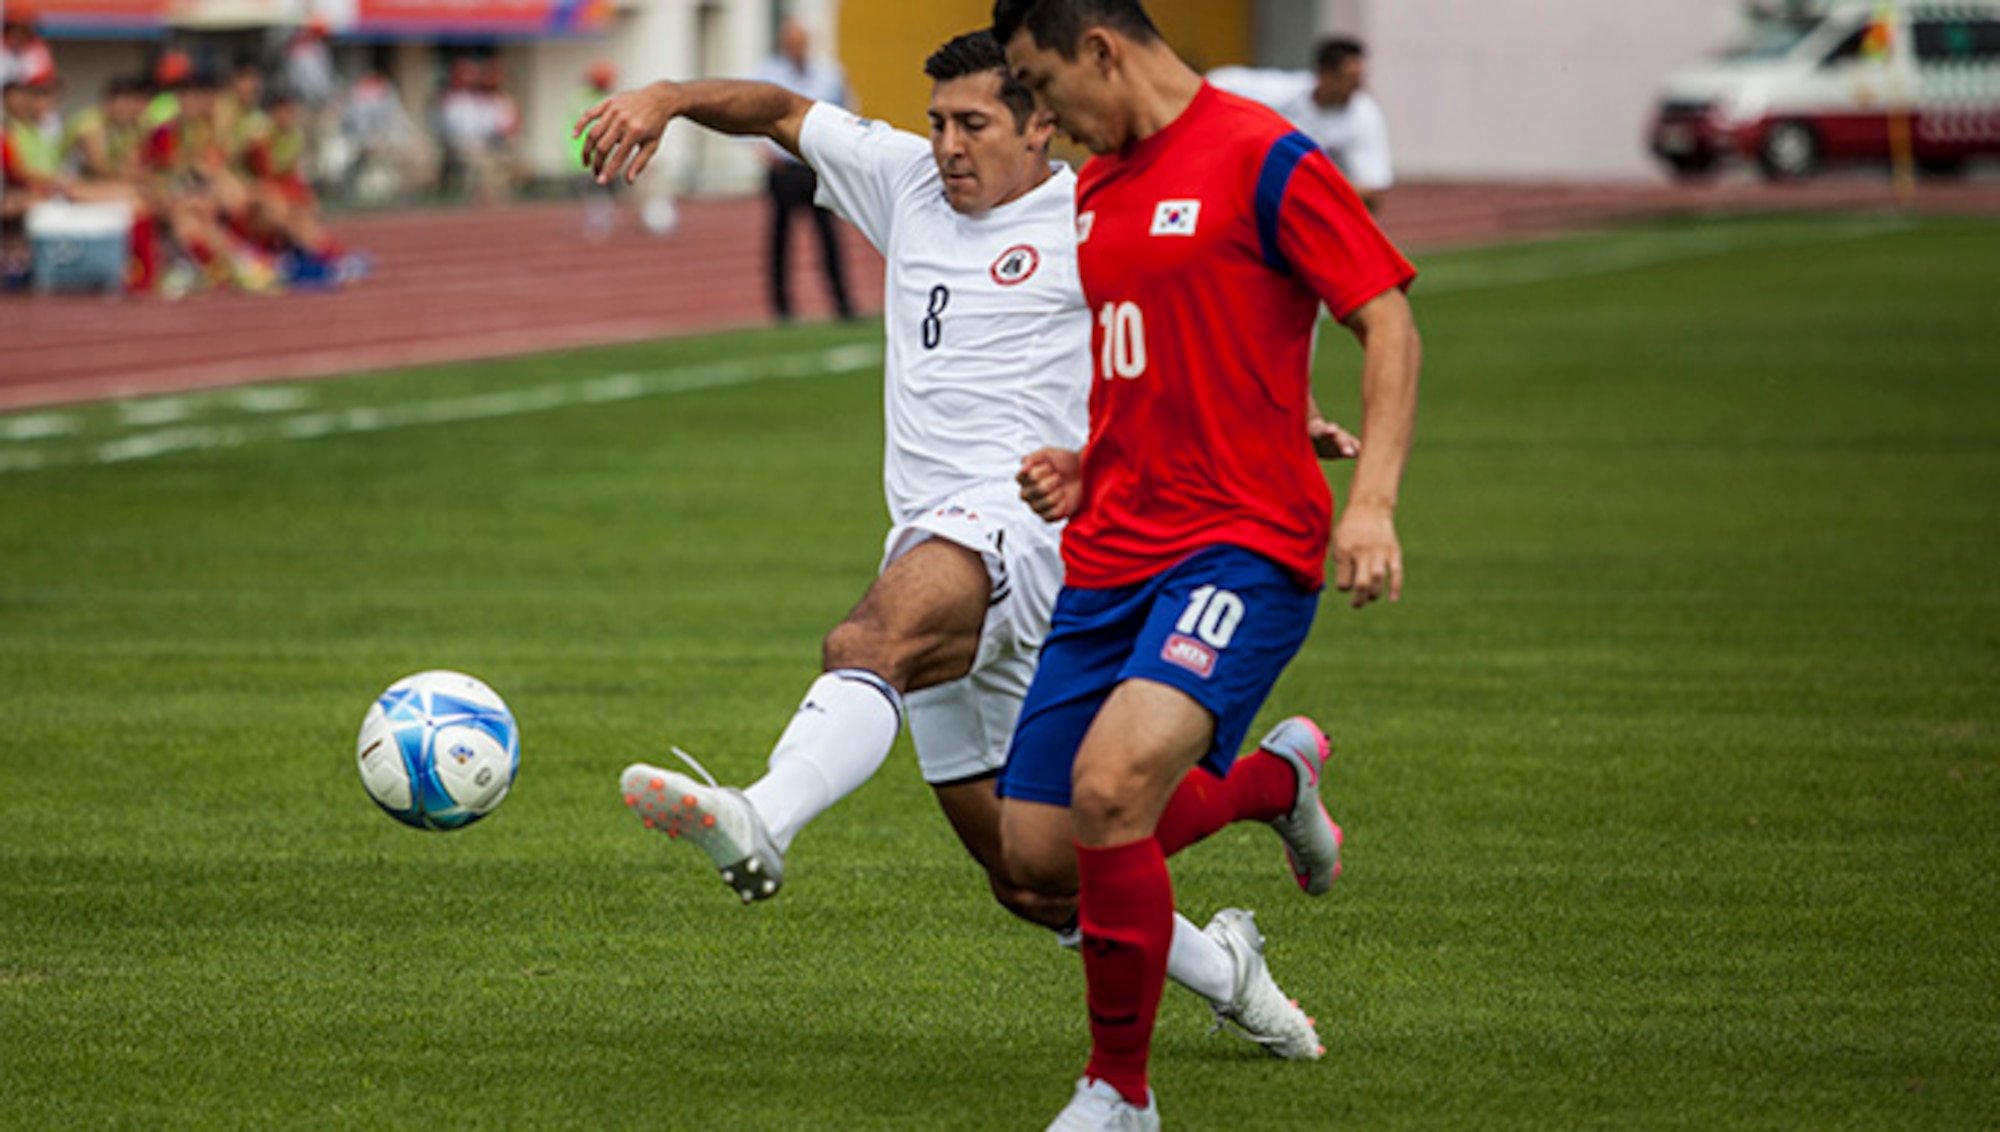 MUNGYEONG, South Korea, (Sept. 30, 2015)— Aaron Zendejas of the U.S. Mens Soccer Team fights for the ball at the first soccer match of the 2015 6th CISM World Games. The CISM World Games provides the opportunity for the athletes of over 100 different Nations to come together and enjoy friendship through sports. The sixth annual CISM World Games are being held aboard Mungyeong, South Korea, Sept. 30-Oct. 11.